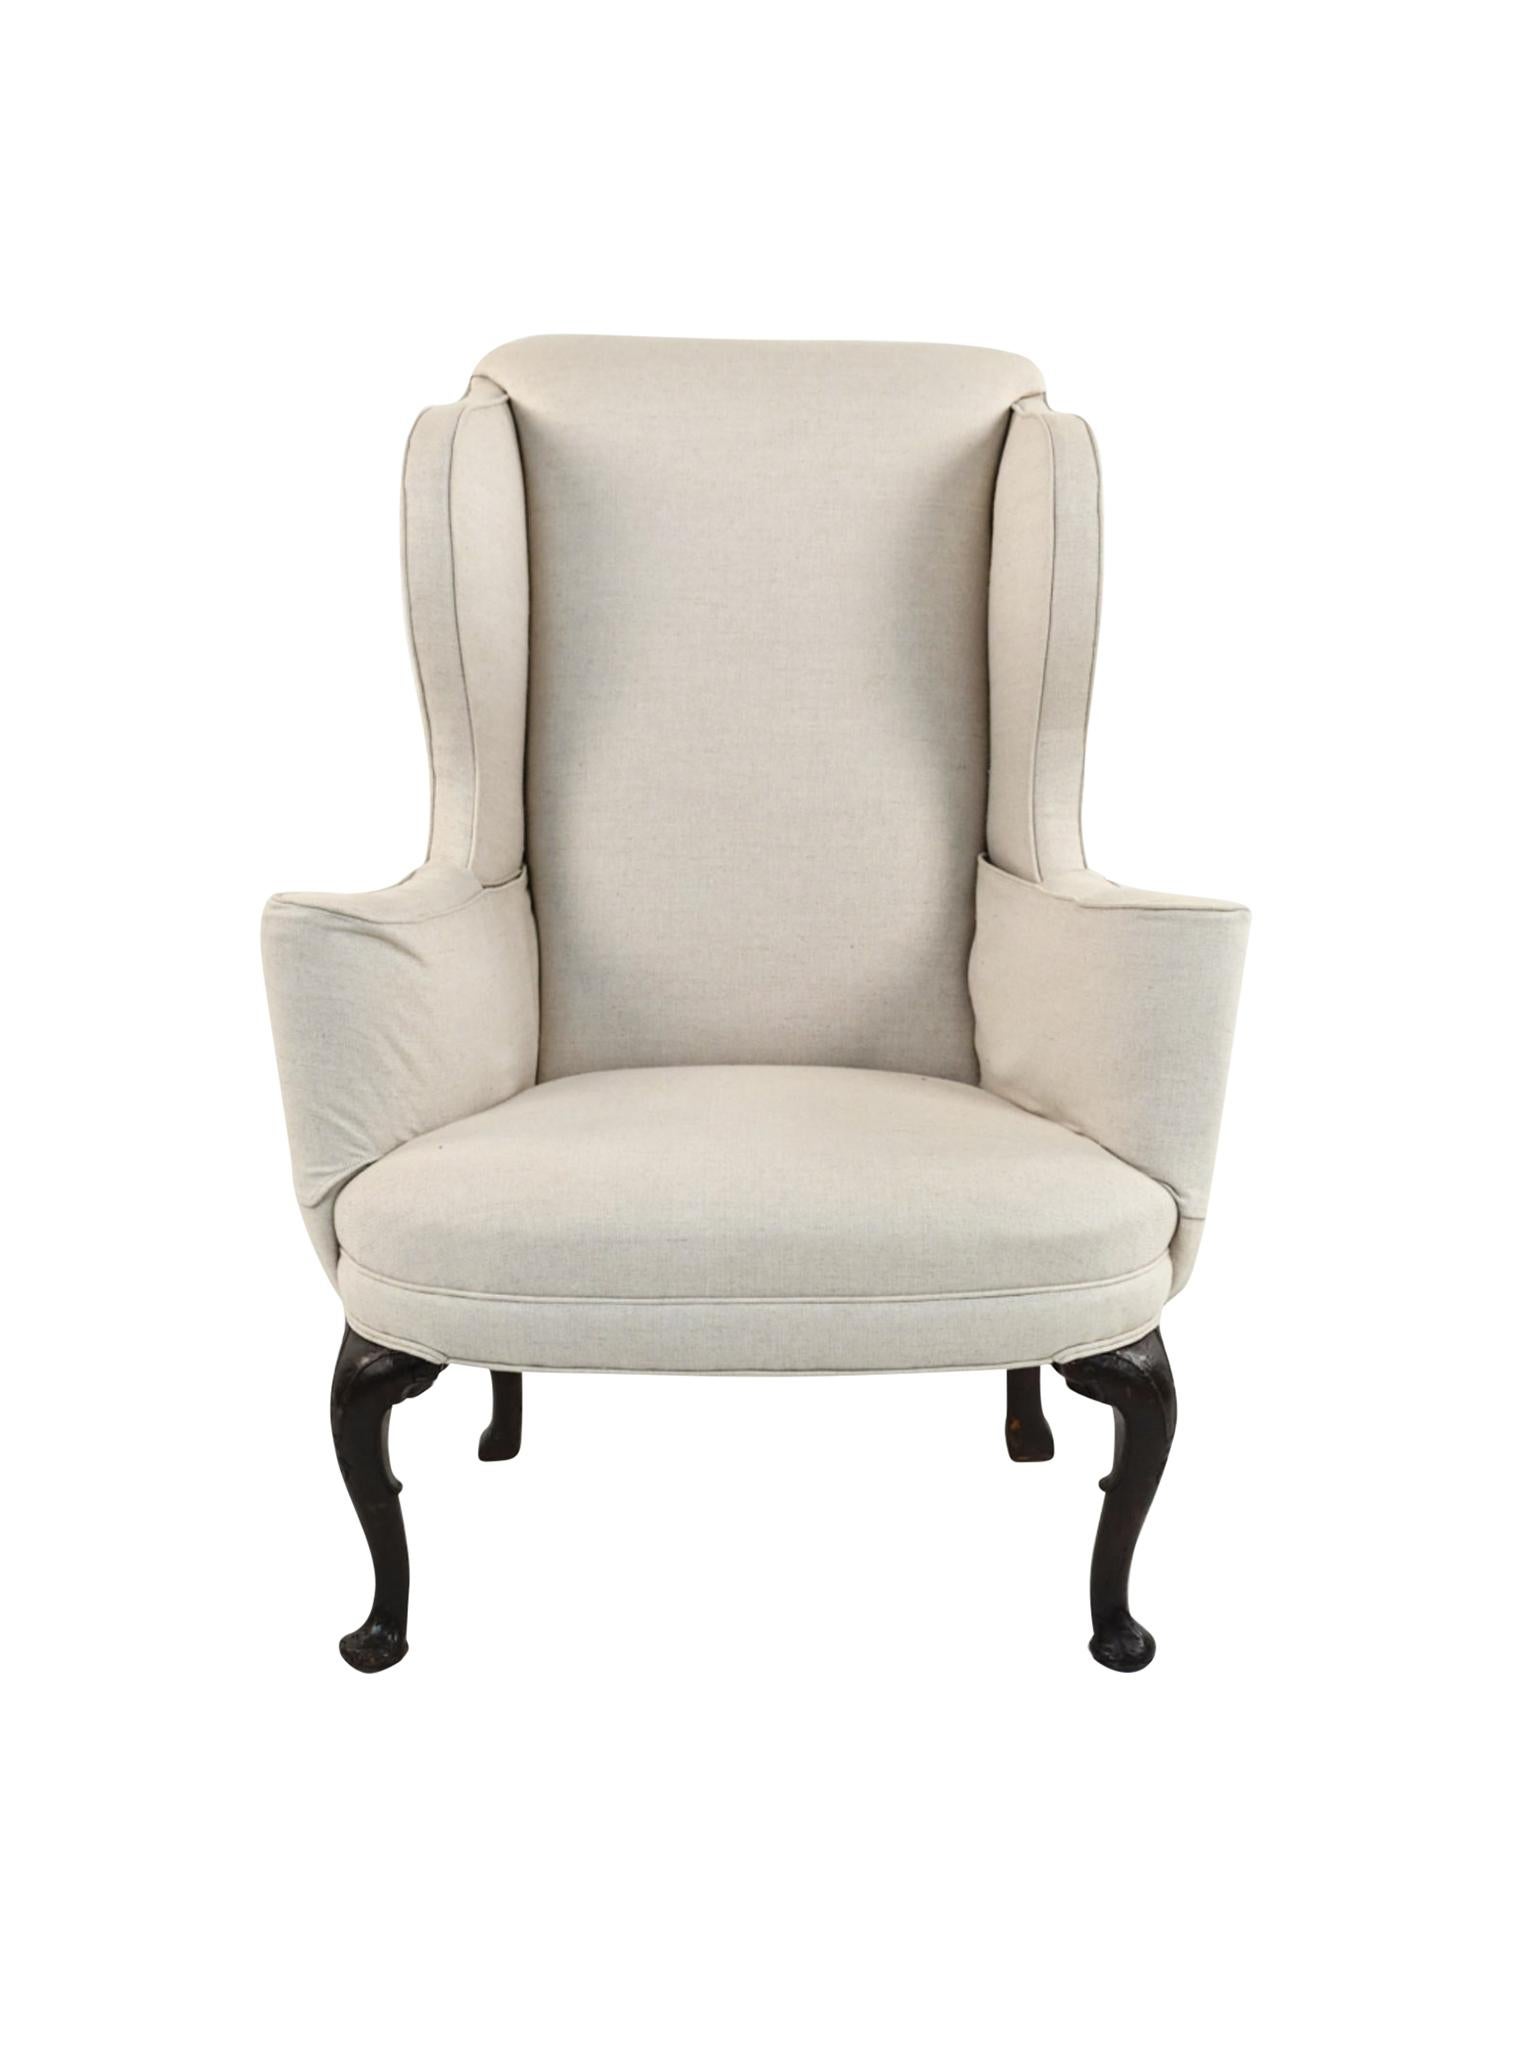 This American Queen Anne wingback armchair was hand-crafted in the 18th century. It has been restored and reupholstered with a beige twill linen from Schumacher. We love the combination of the new fabric and the beautifully aged, hand-carved